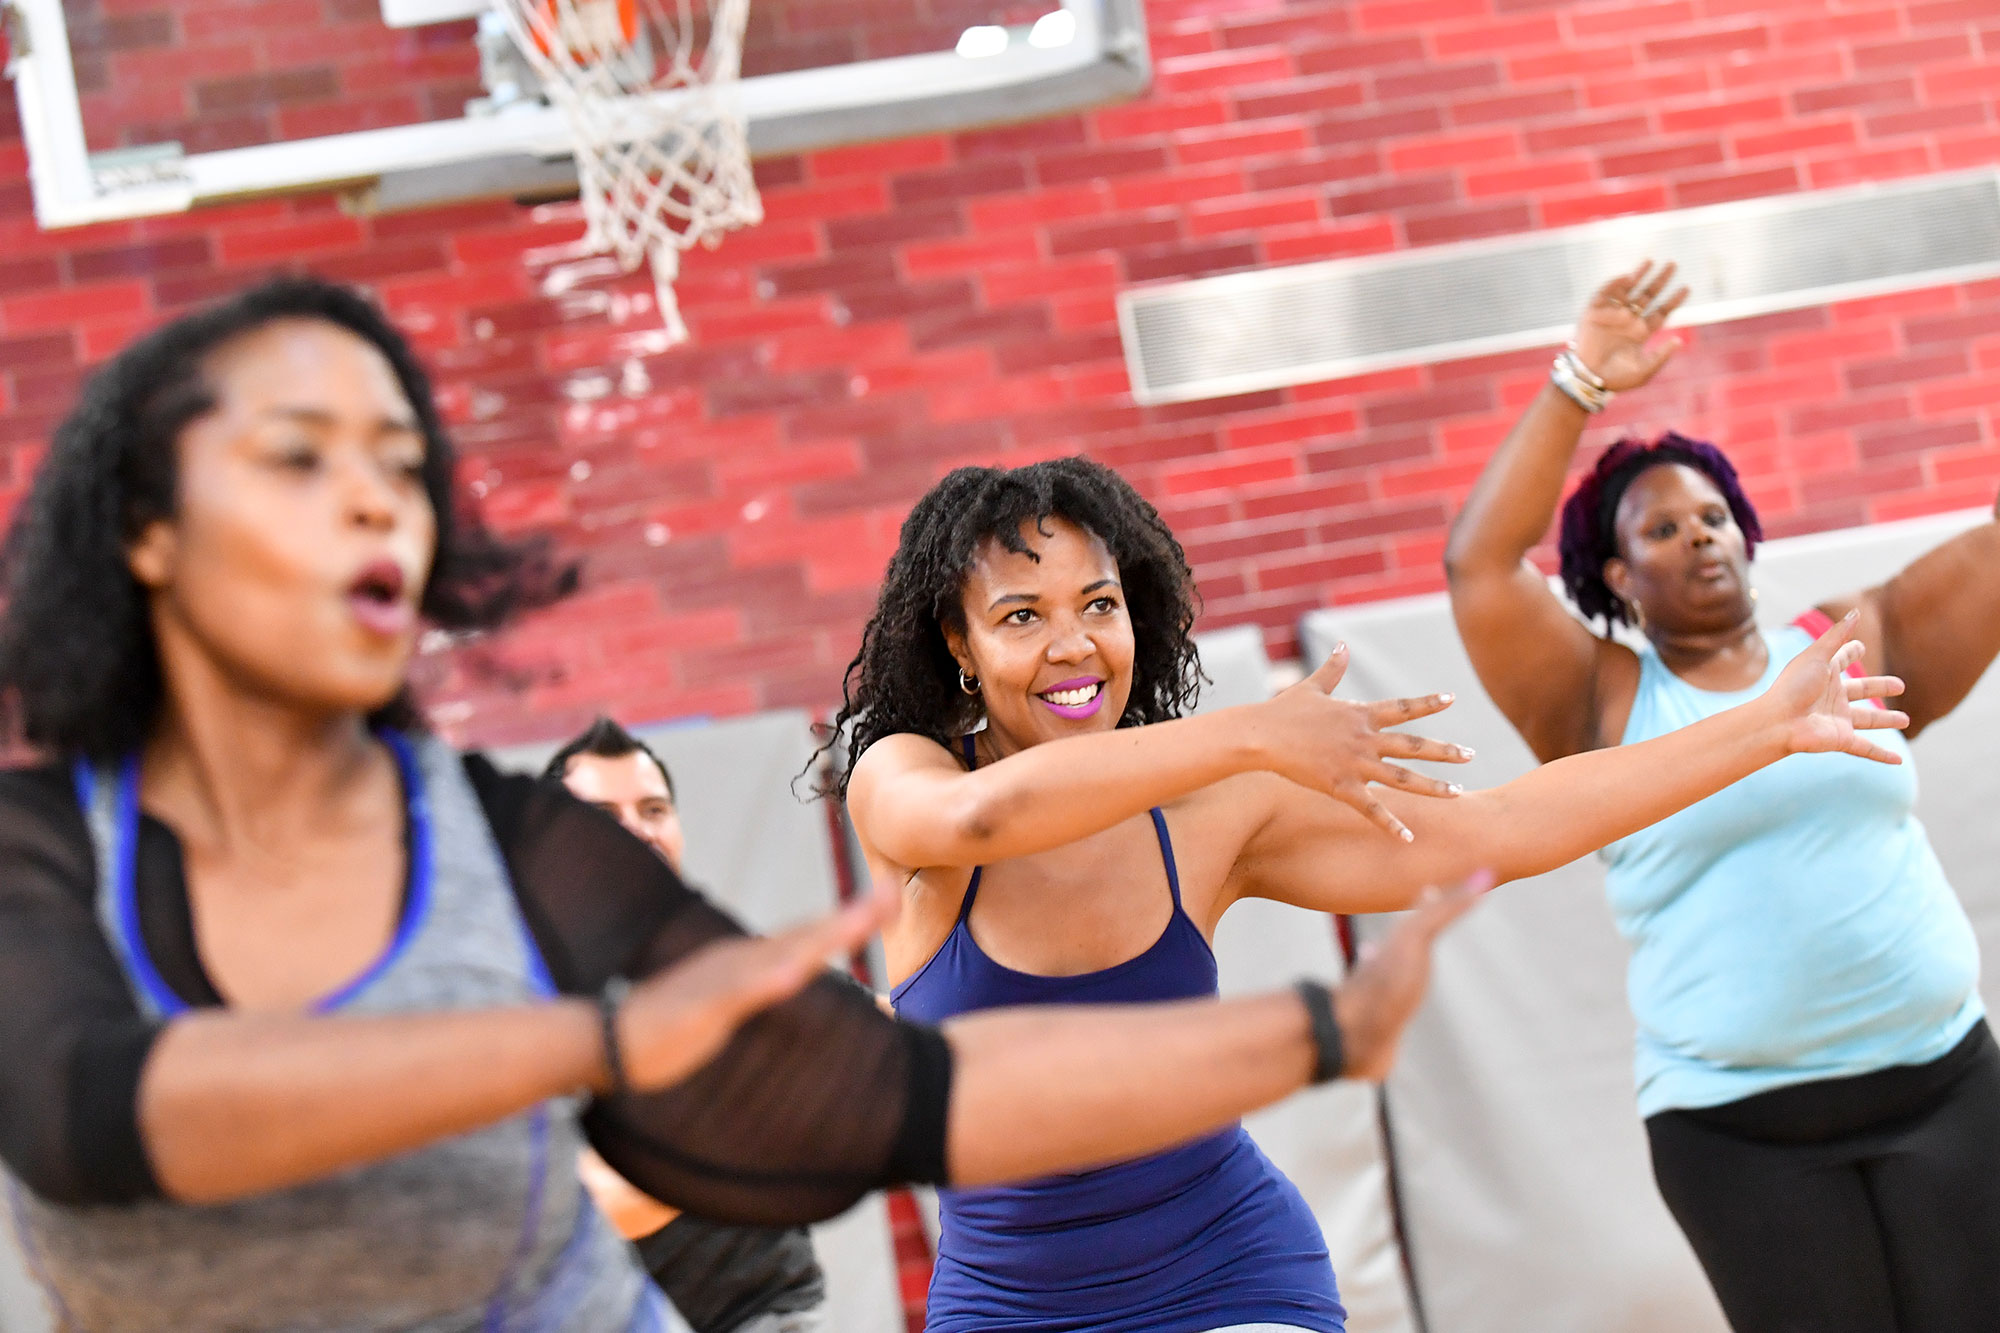 Free fitness classes are offered by the New York City parks department through a program called Shape Up NYC. A hundred different exercise and dance classes are held each week in a wide range of locations. Photo: NYC Parks/Daniel Avila